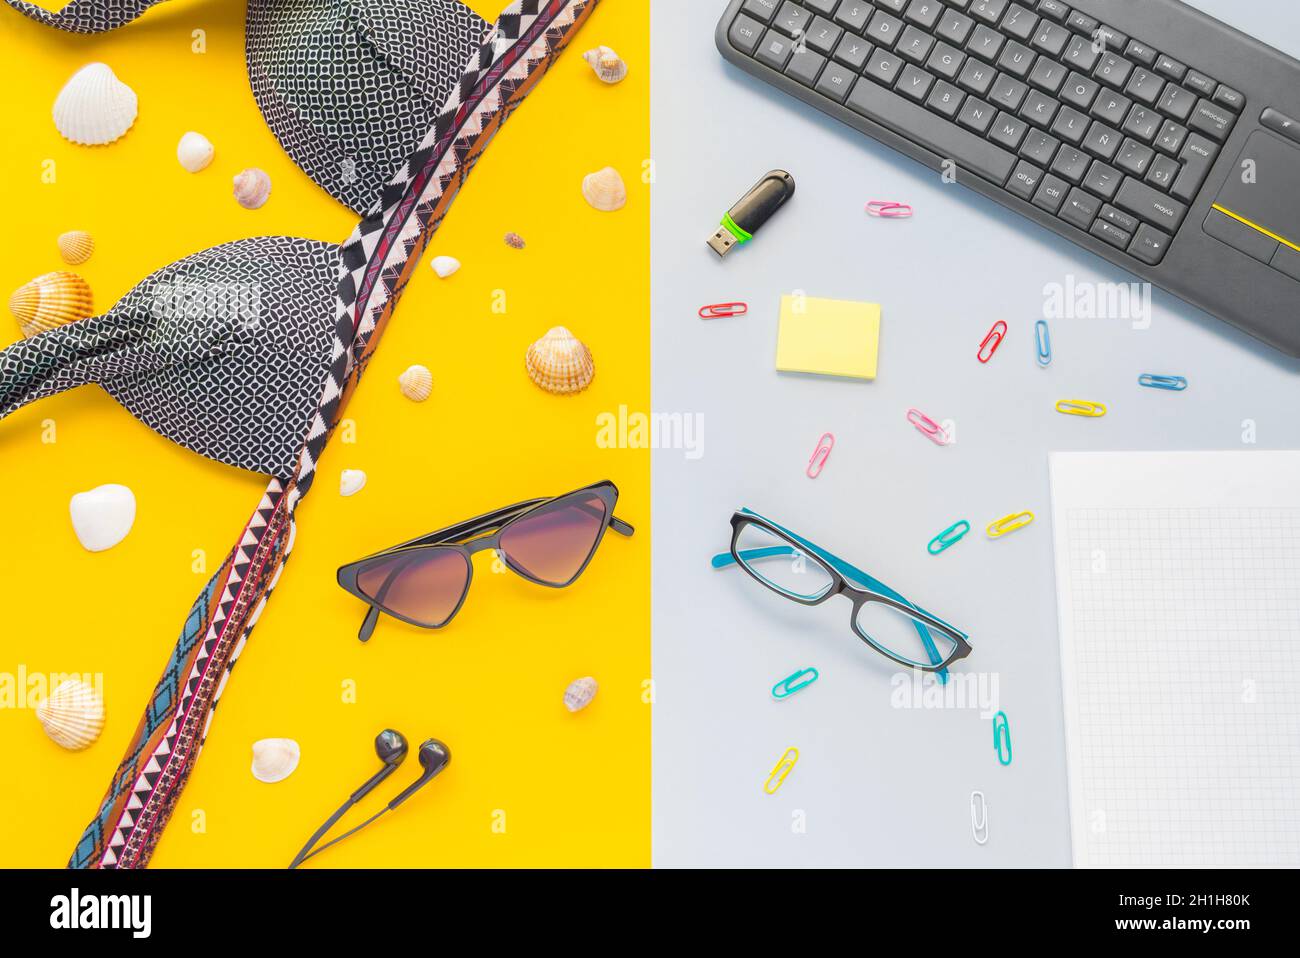 Working desk with clips, keyboard, eyewear, and bikini on a yellow and blue surface Stock Photo